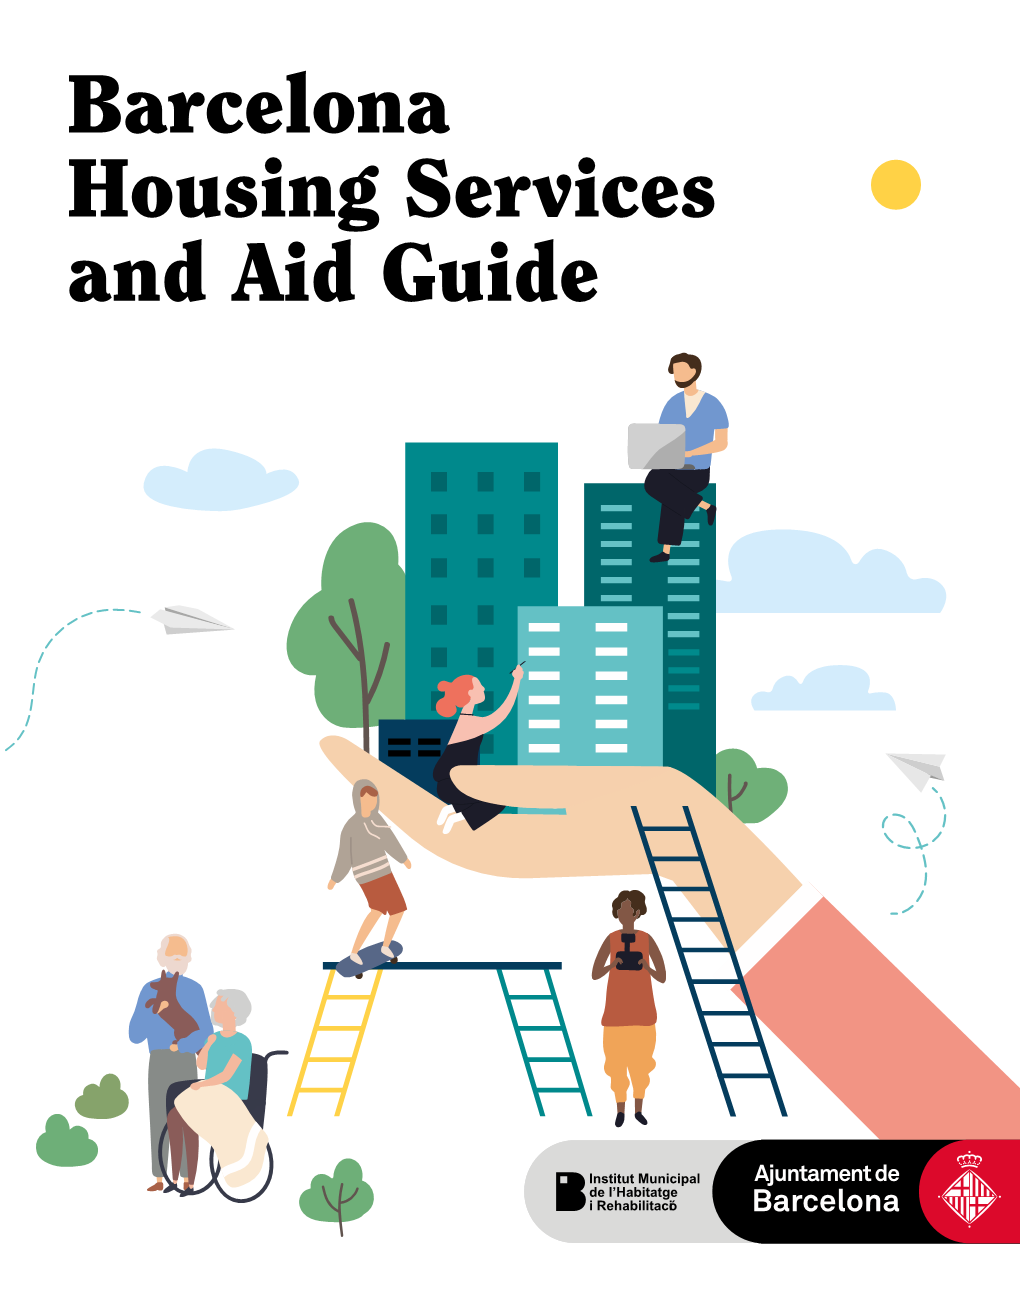 Barcelona Housing Services and Aid Guide